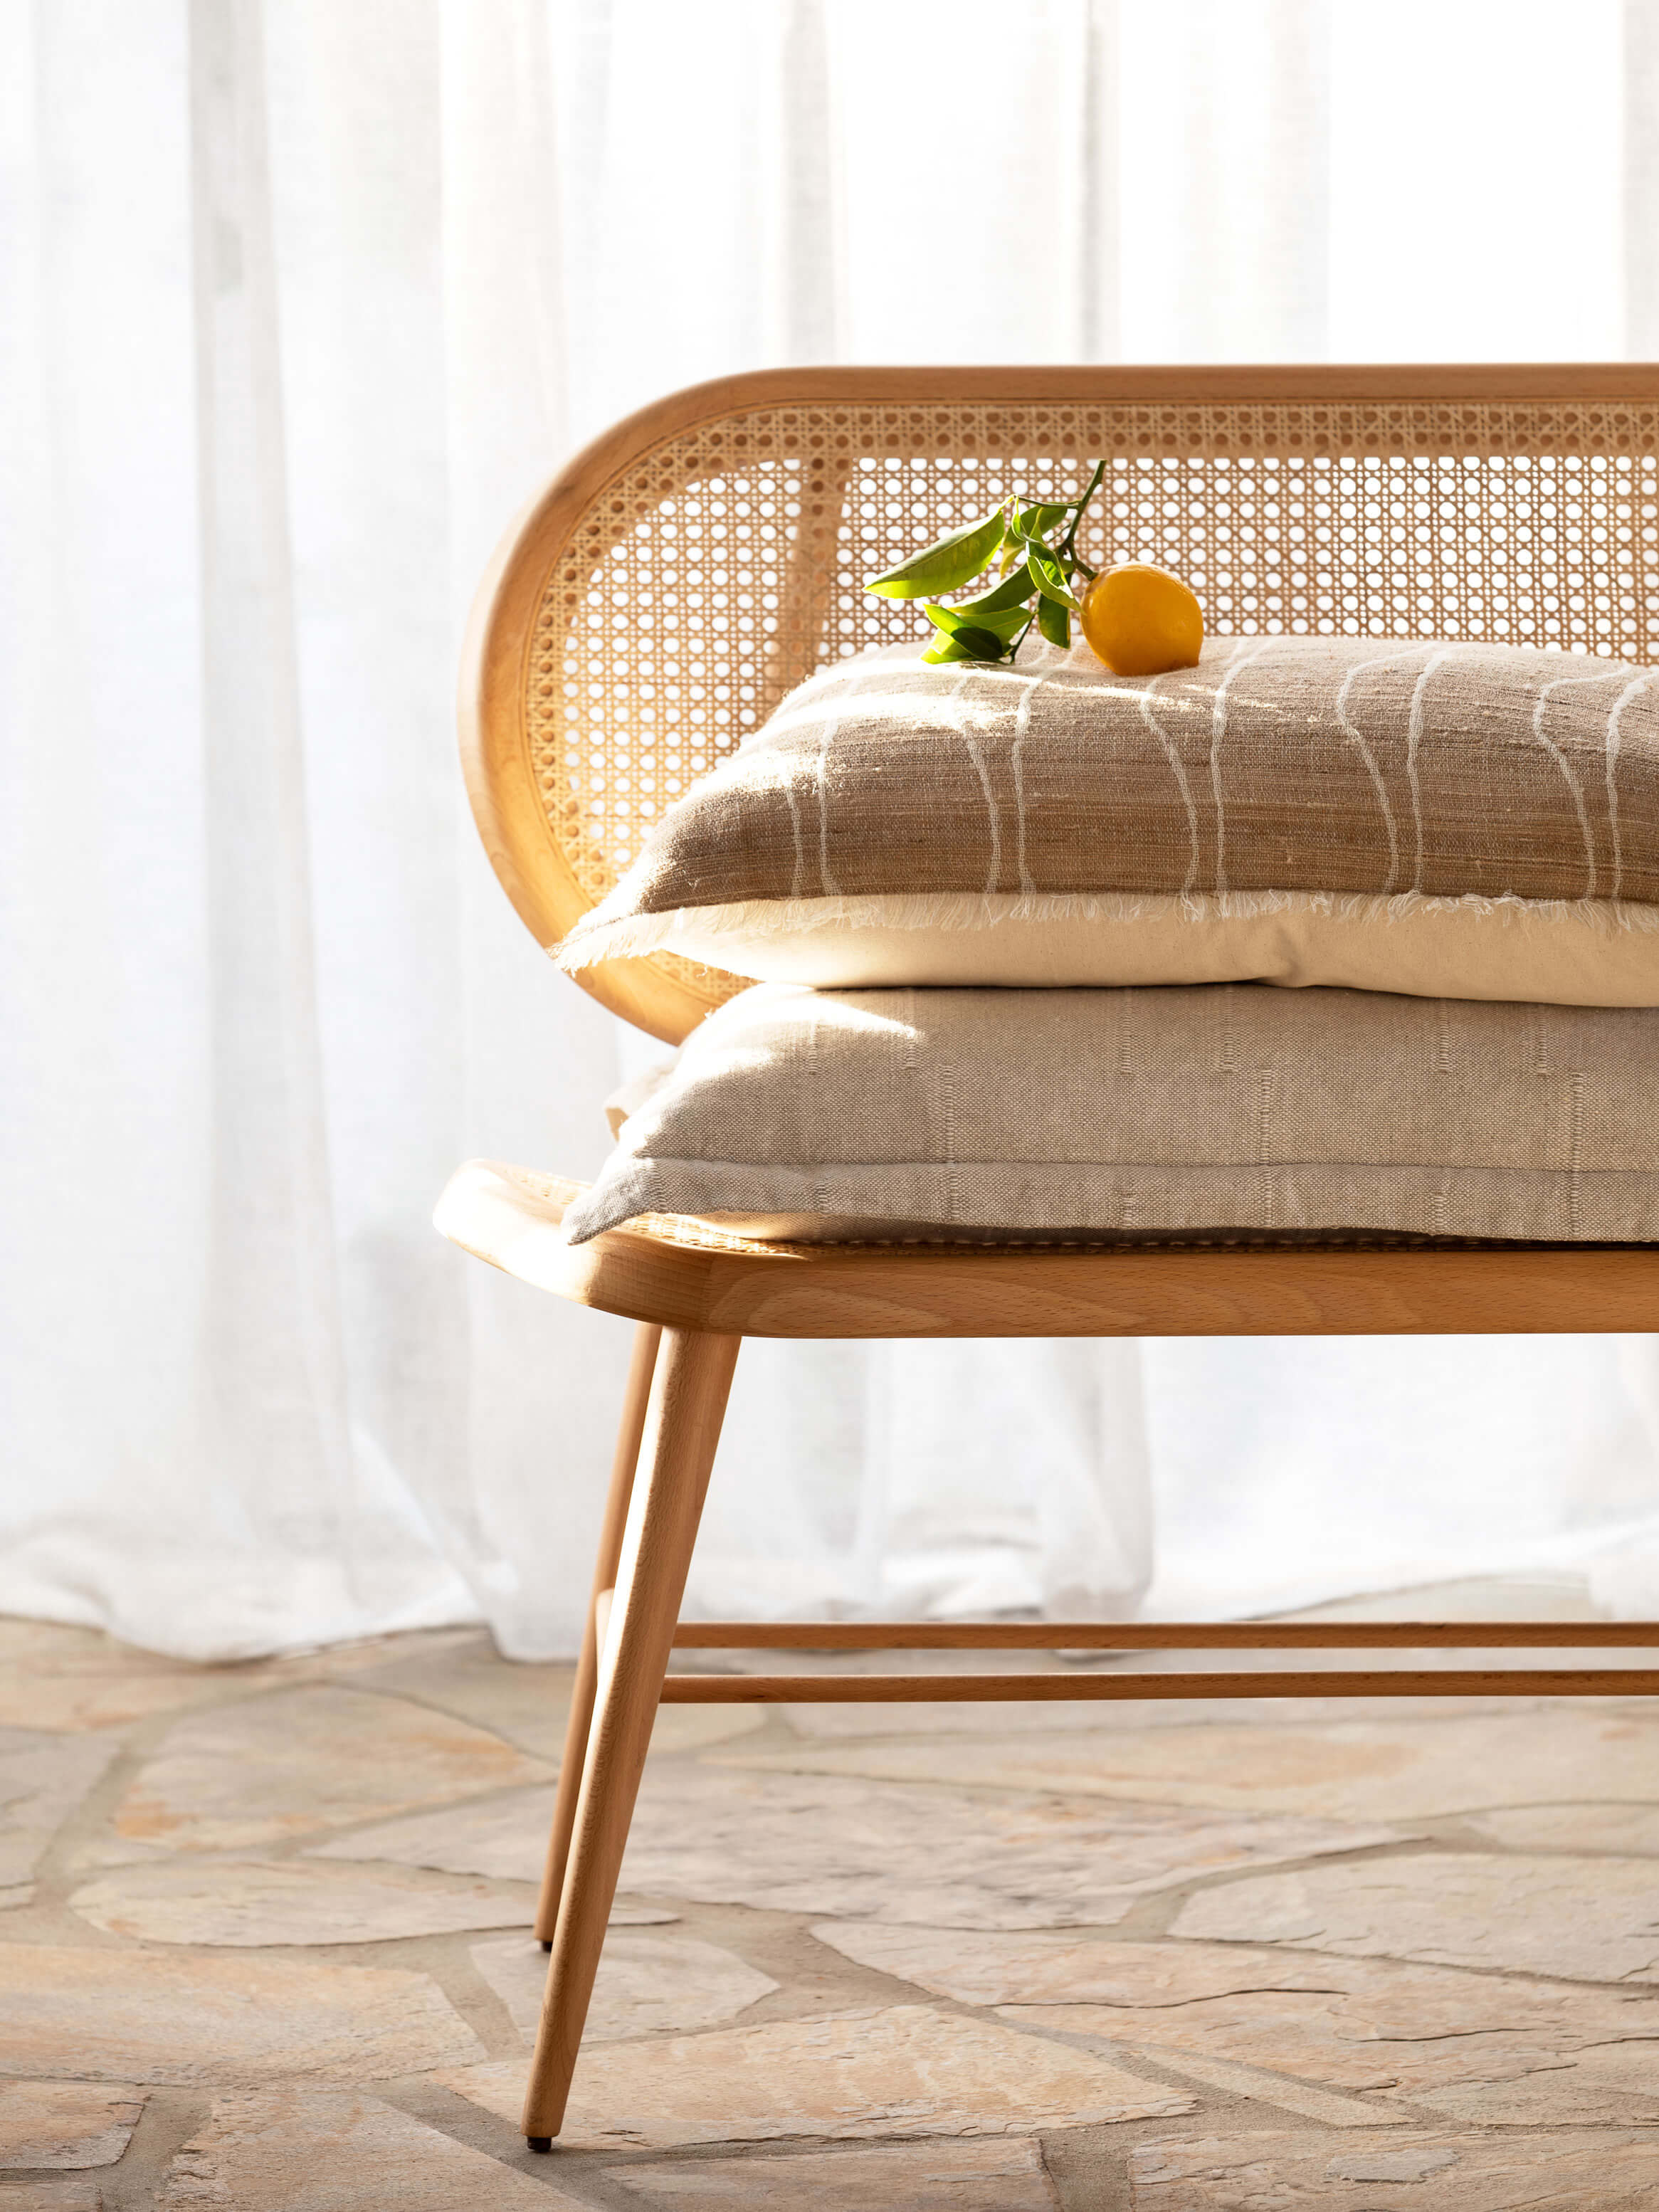 Palermo Natural French Linen Rectangle Cushion